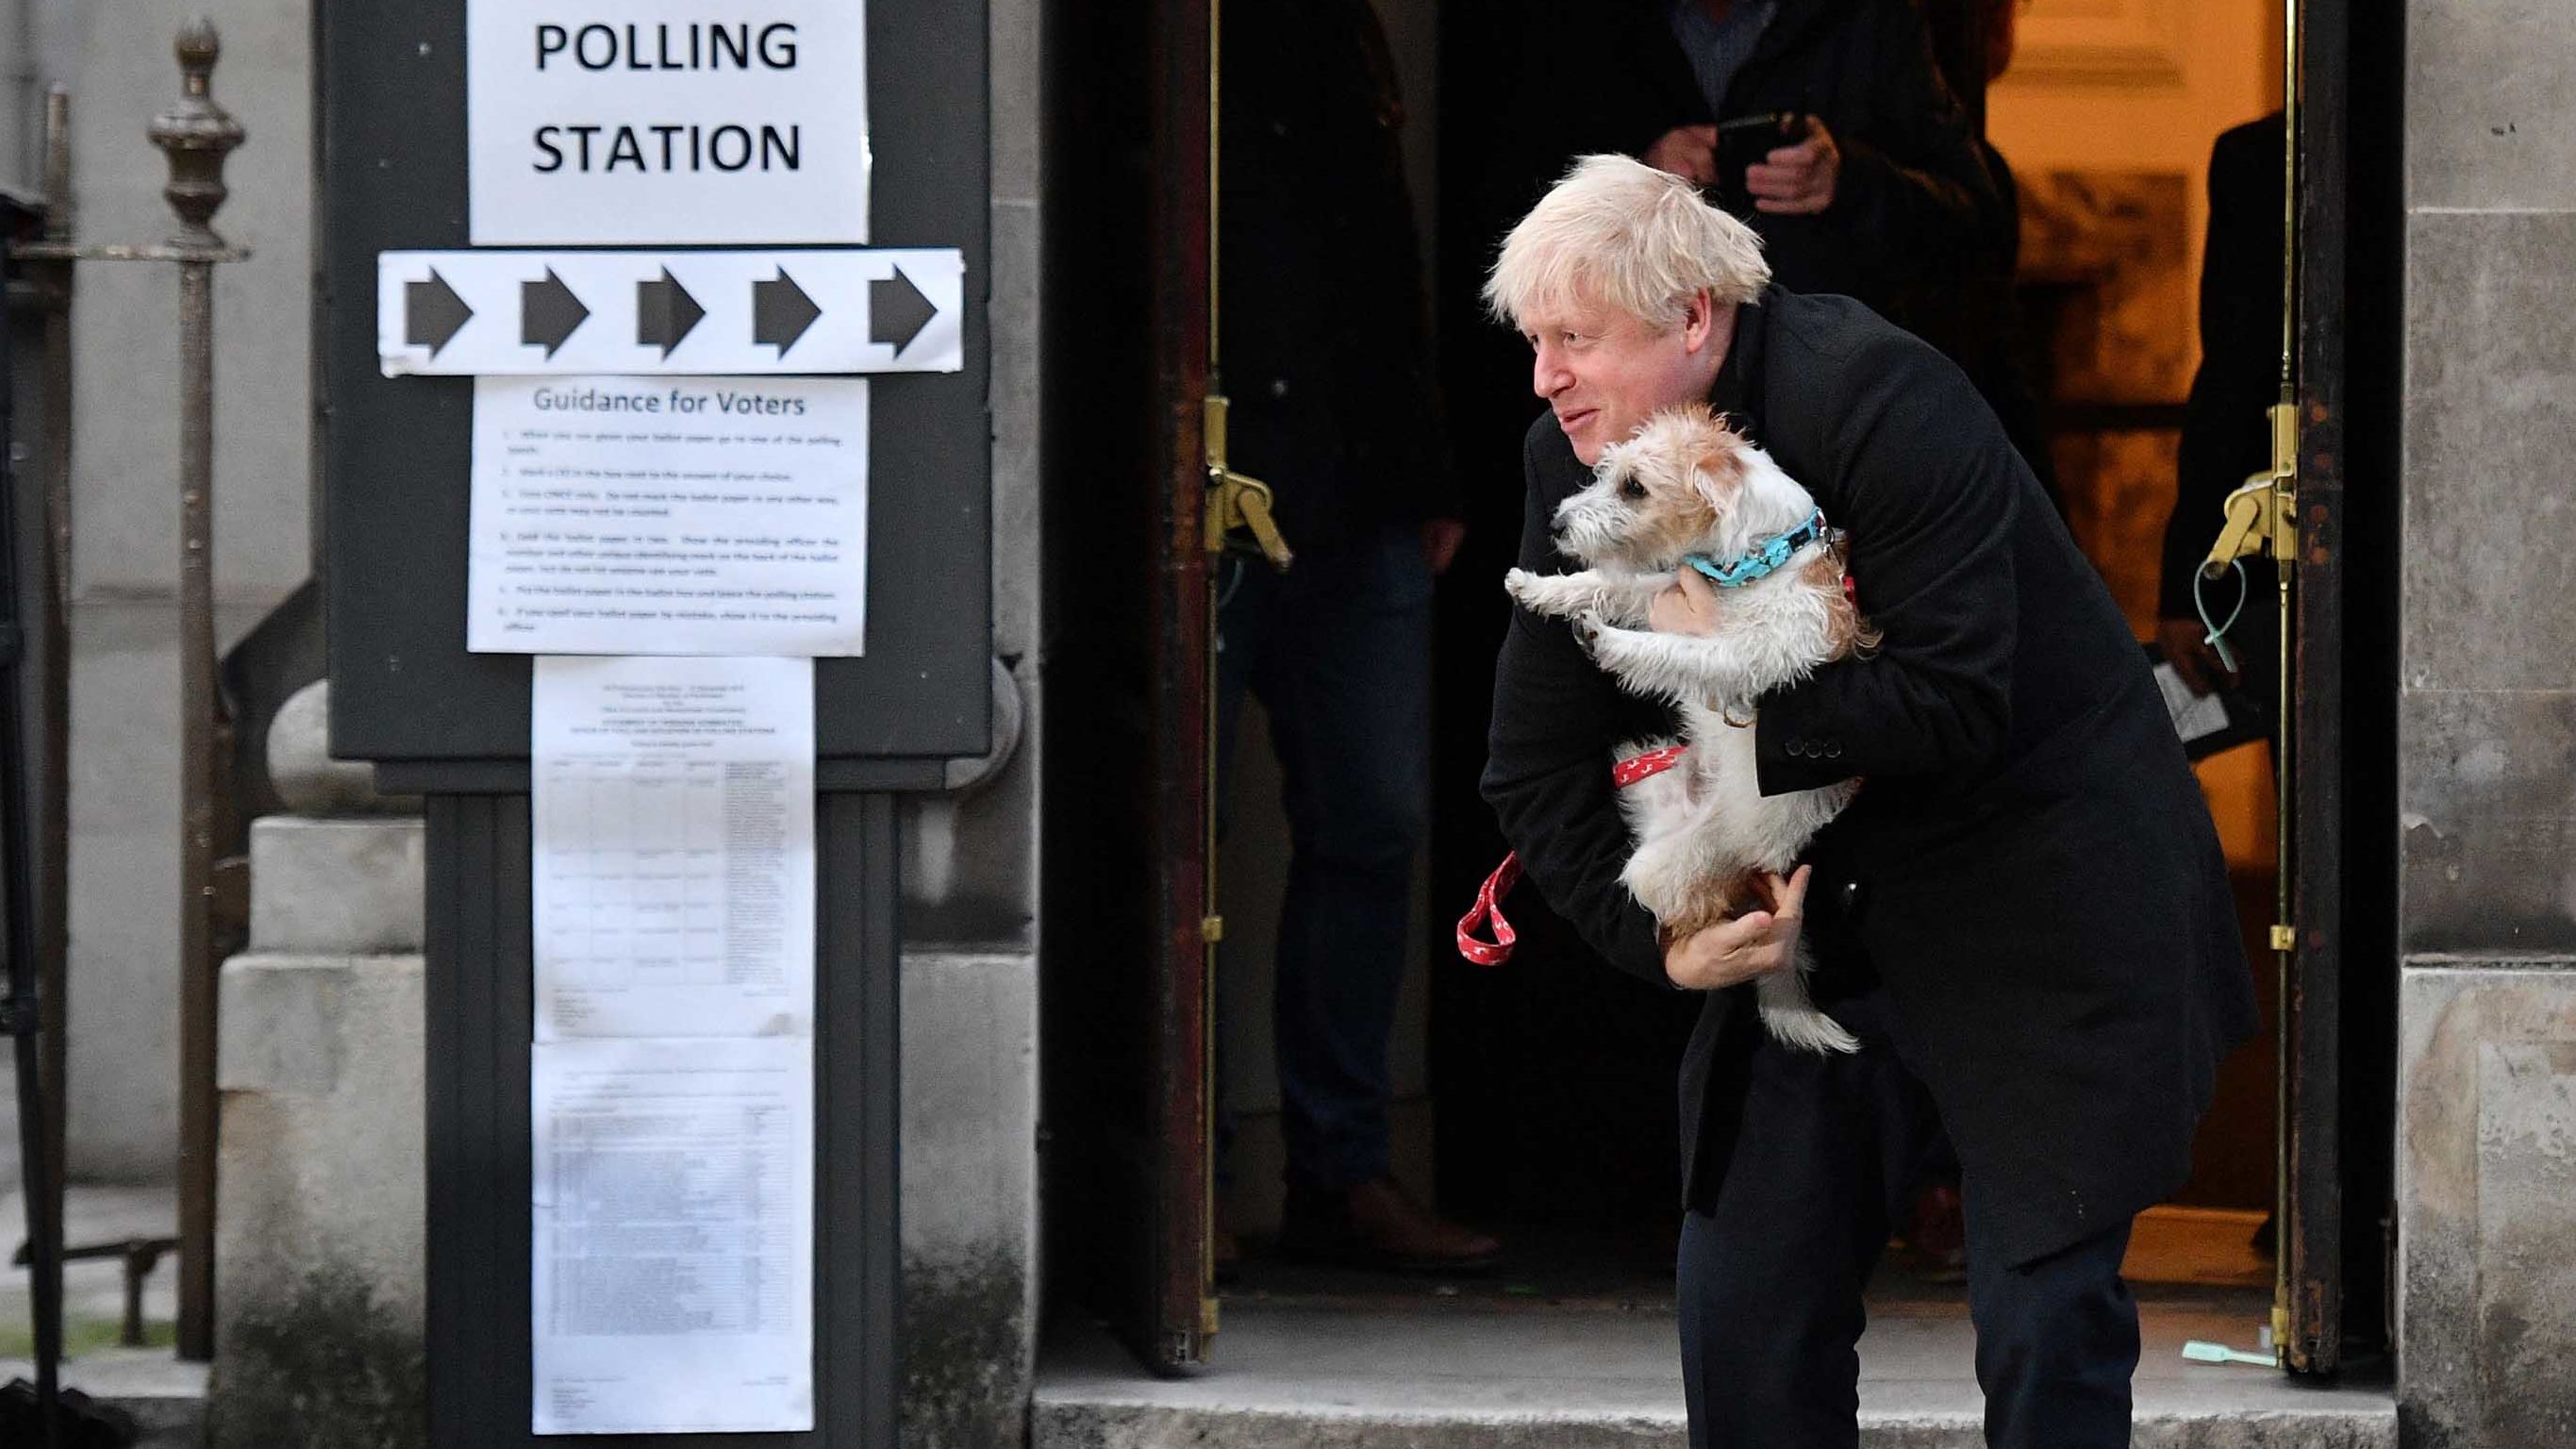 Johnson poses with his dog Dilyn as he leaves a polling station in London in December 2019.